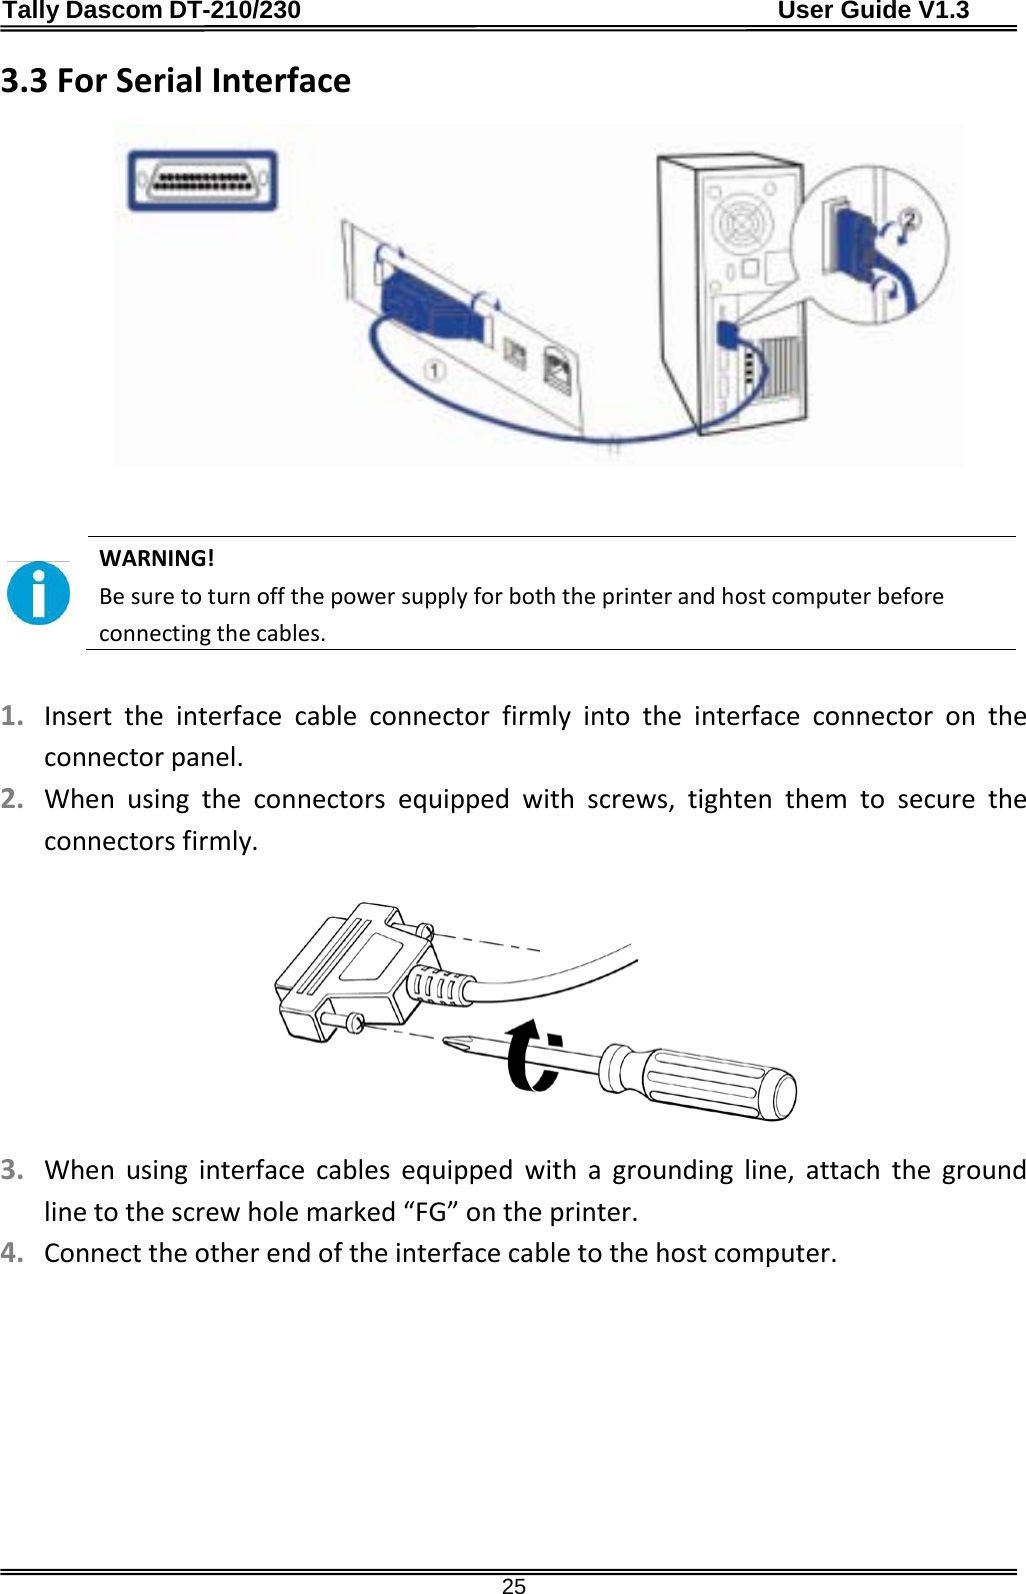 Tally Dascom DT-210/230                                      User Guide V1.3  25 3.3 For Serial Interface      WARNING!   Be sure to turn off the power supply for both the printer and host computer before connecting the cables.  1. Insert the interface cable connector firmly into the interface connector on the connector panel. 2. When using the connectors equipped with screws, tighten them to secure the connectors firmly.    3. When using interface cables equipped with a grounding line, attach the ground line to the screw hole marked “FG” on the printer. 4. Connect the other end of the interface cable to the host computer.  